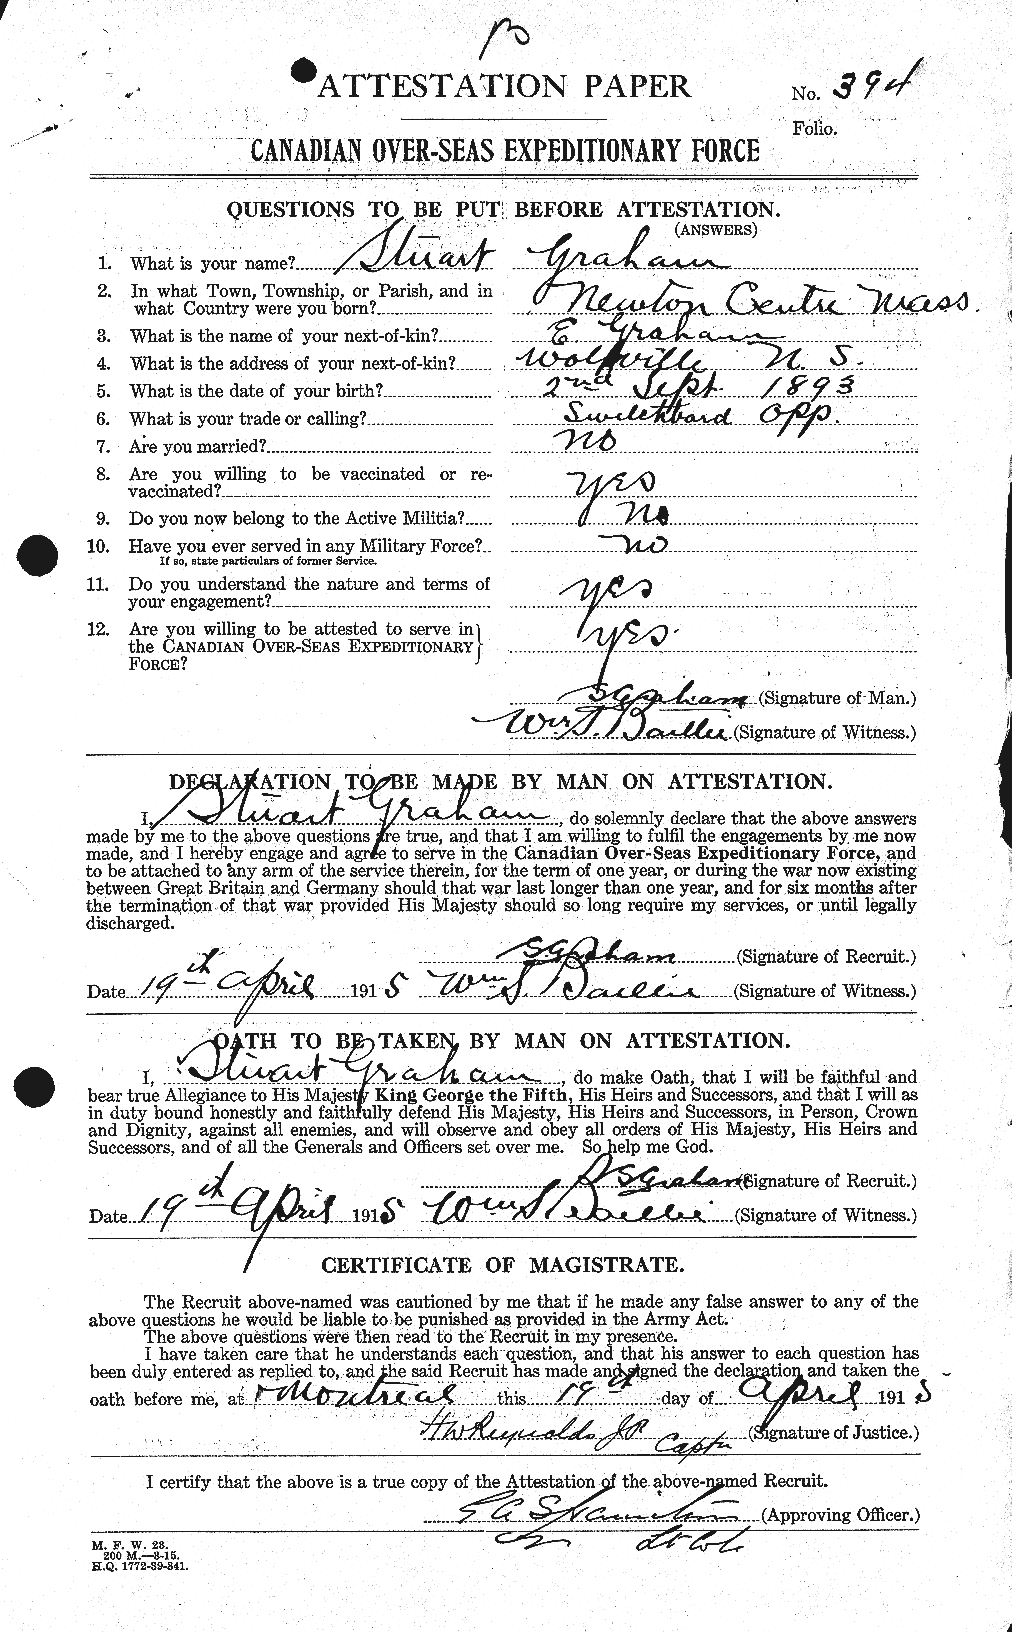 Personnel Records of the First World War - CEF 359473a